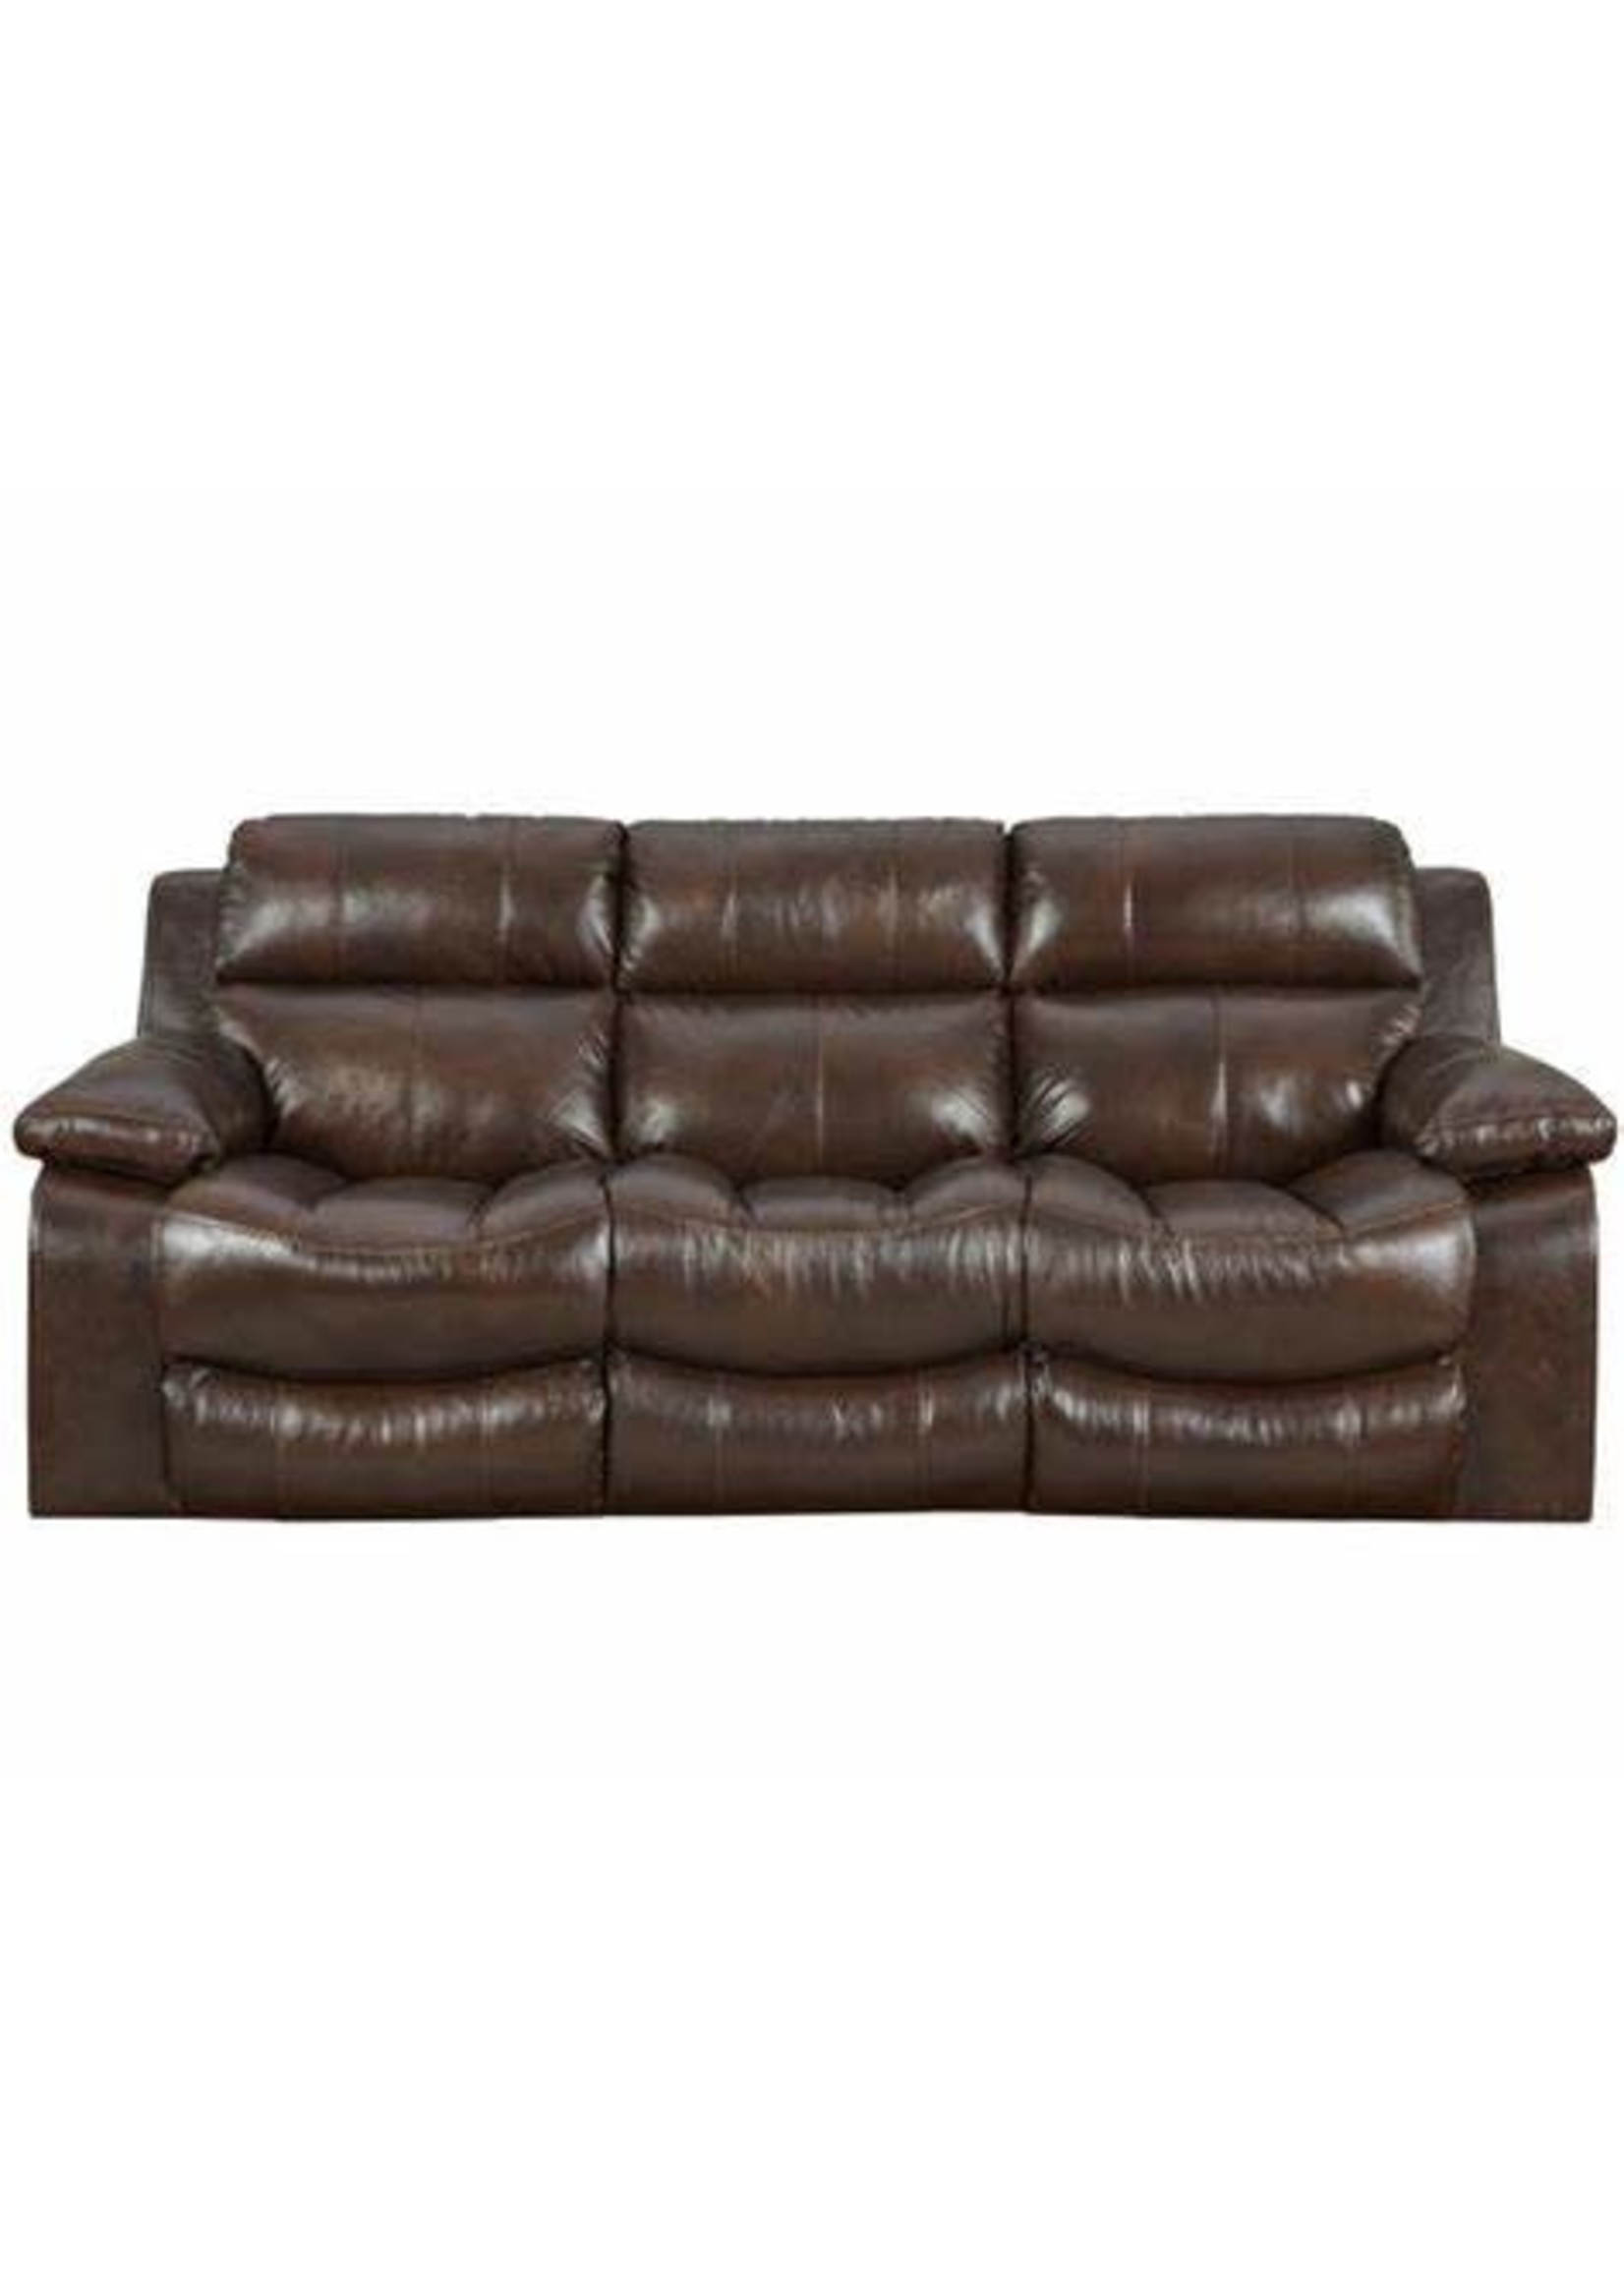 CATNAPPER 4991 SMT SOFA RECLINING  BROWN LEATHER